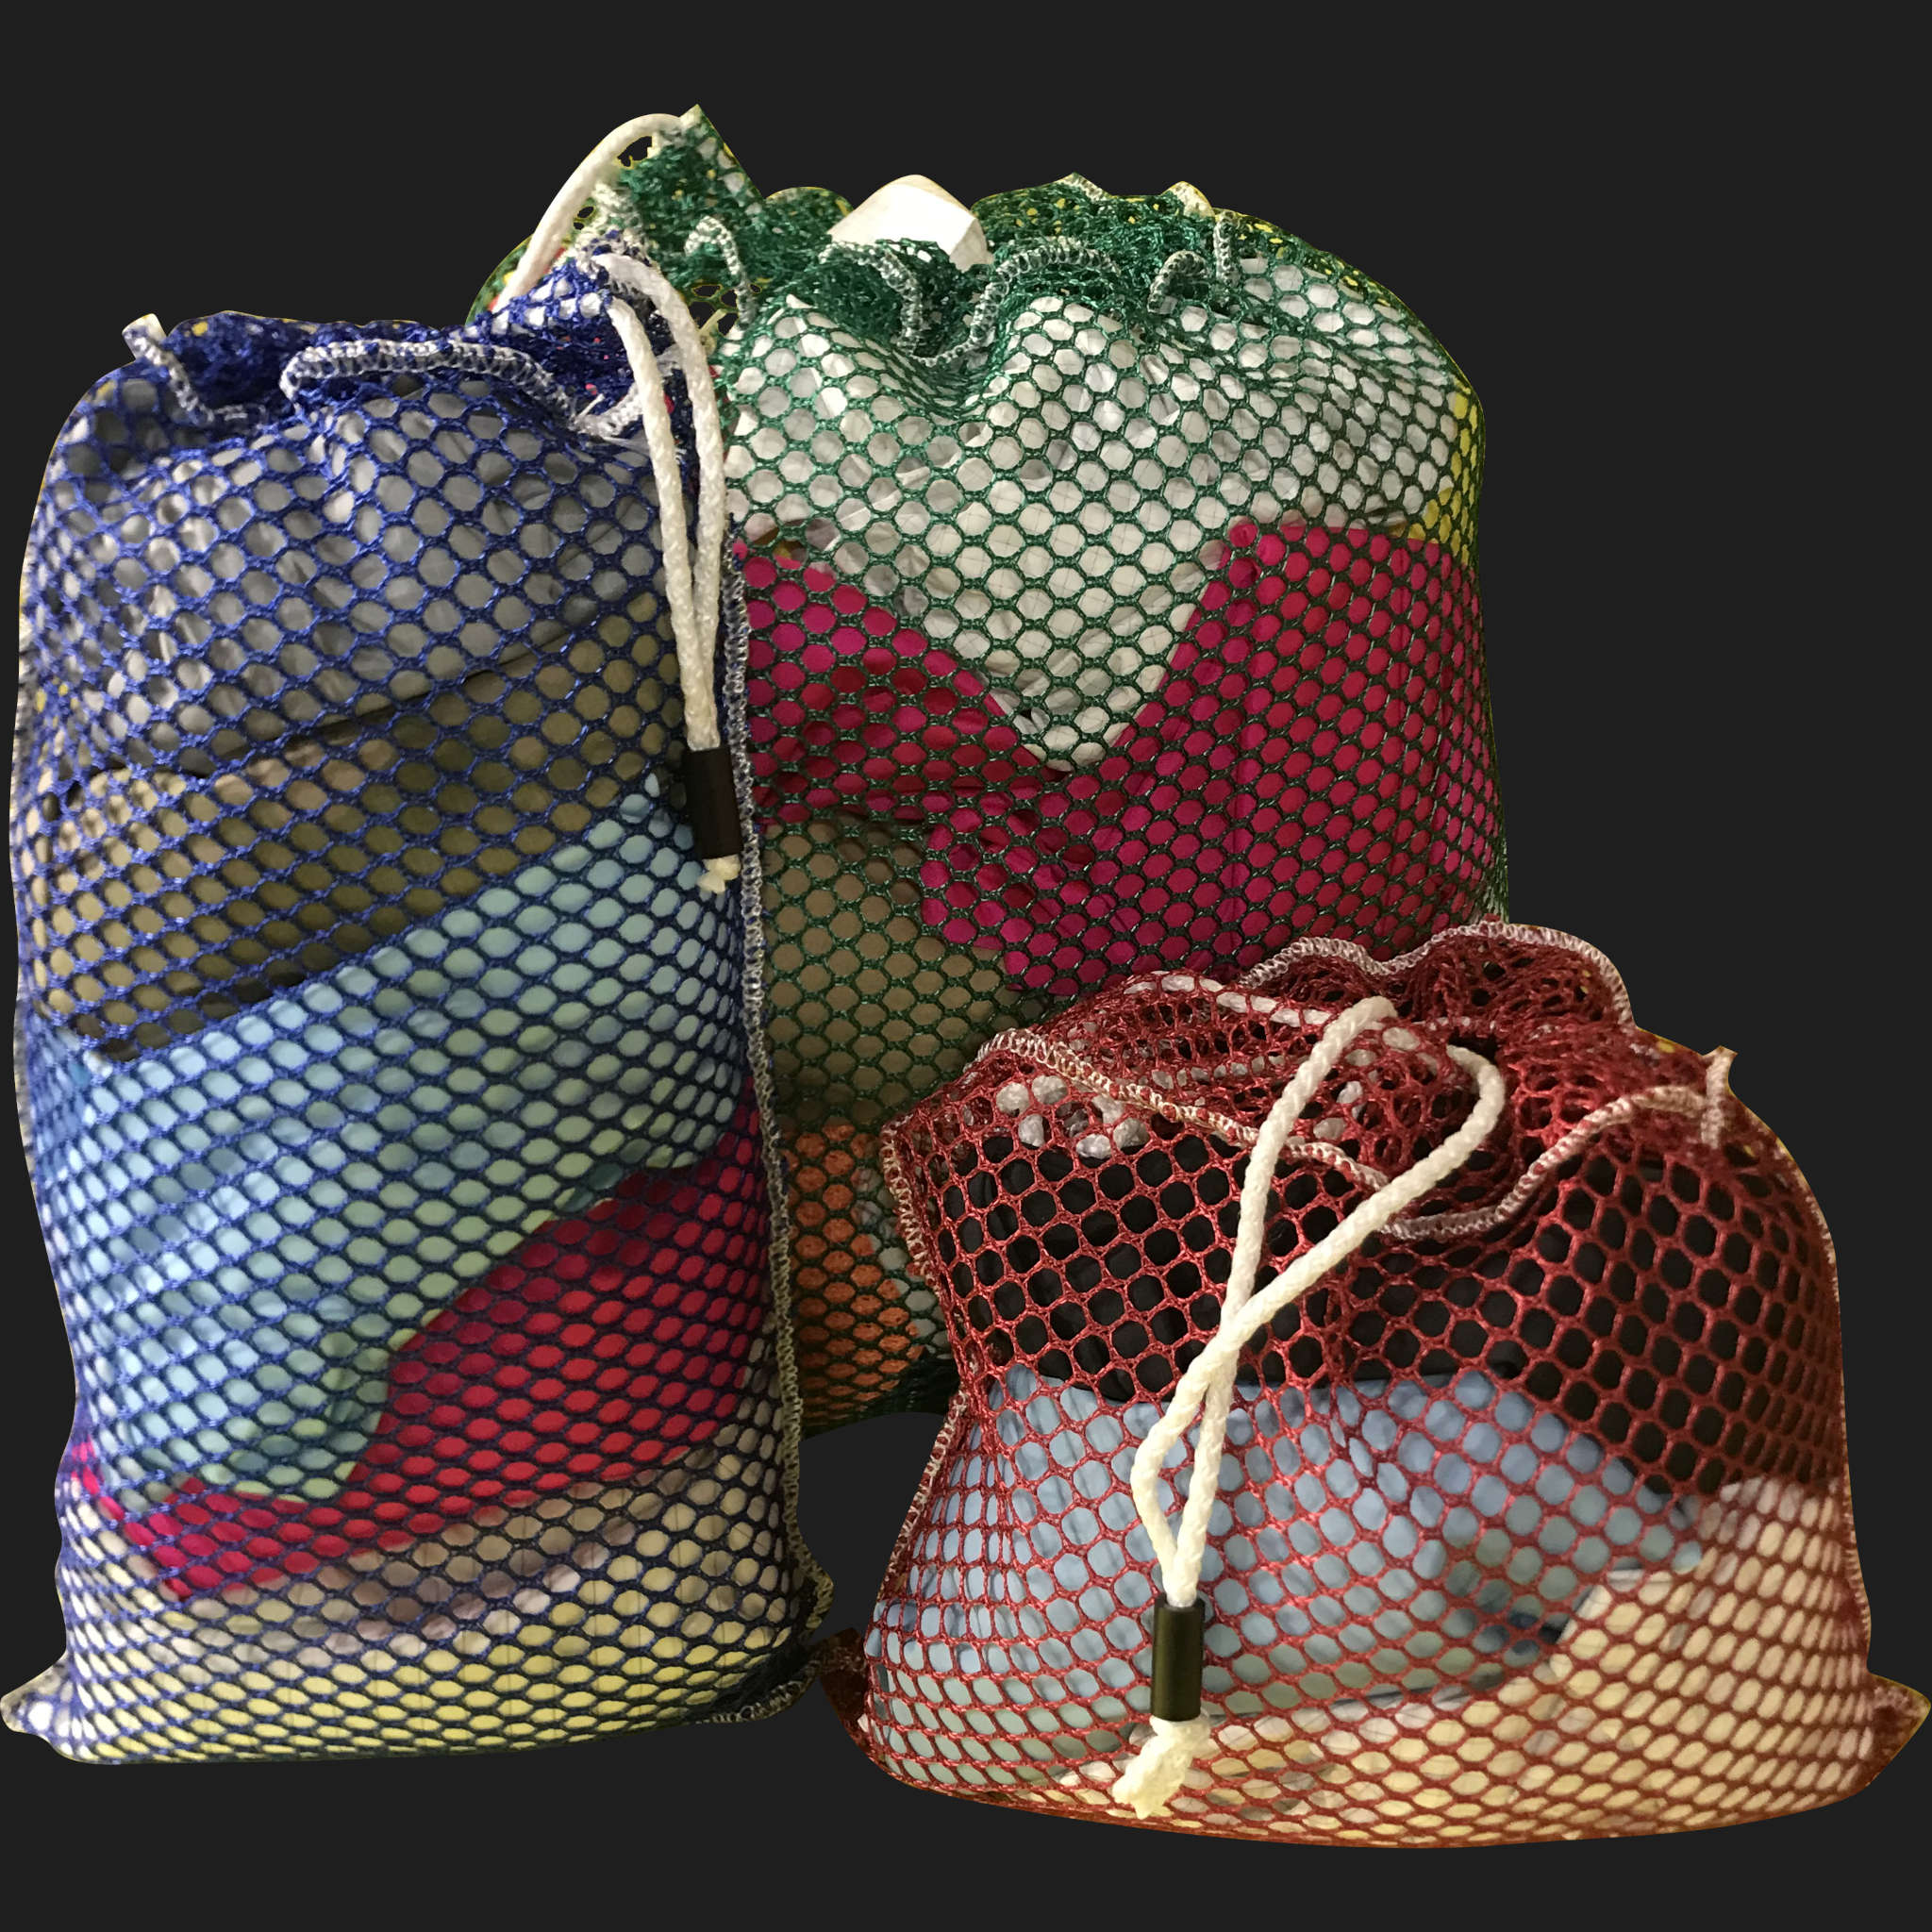 30" x 50" Customized Mesh-Net-Laundry Bags Heavy Duty with Cord and barrellock closure